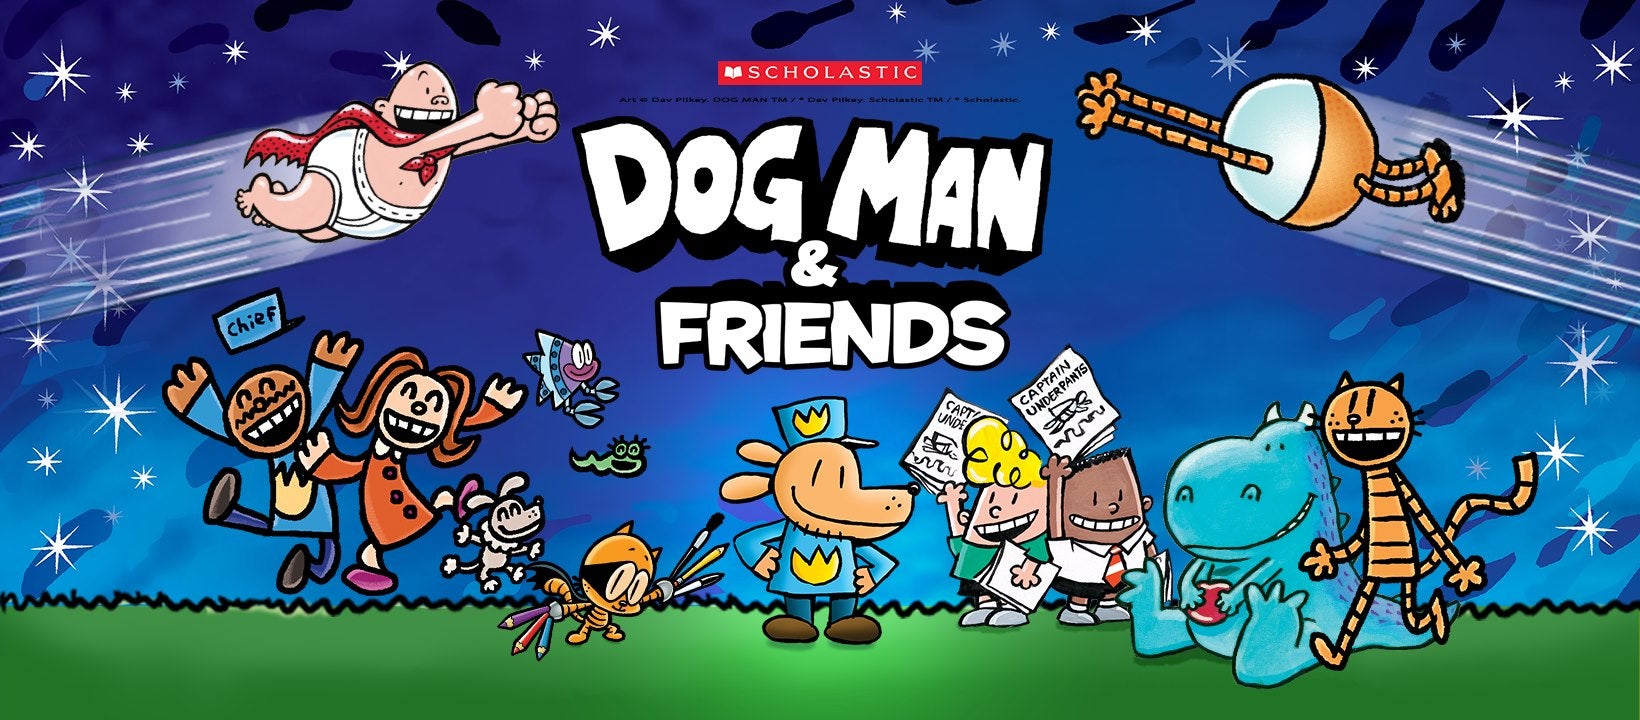 Dog Man and friends